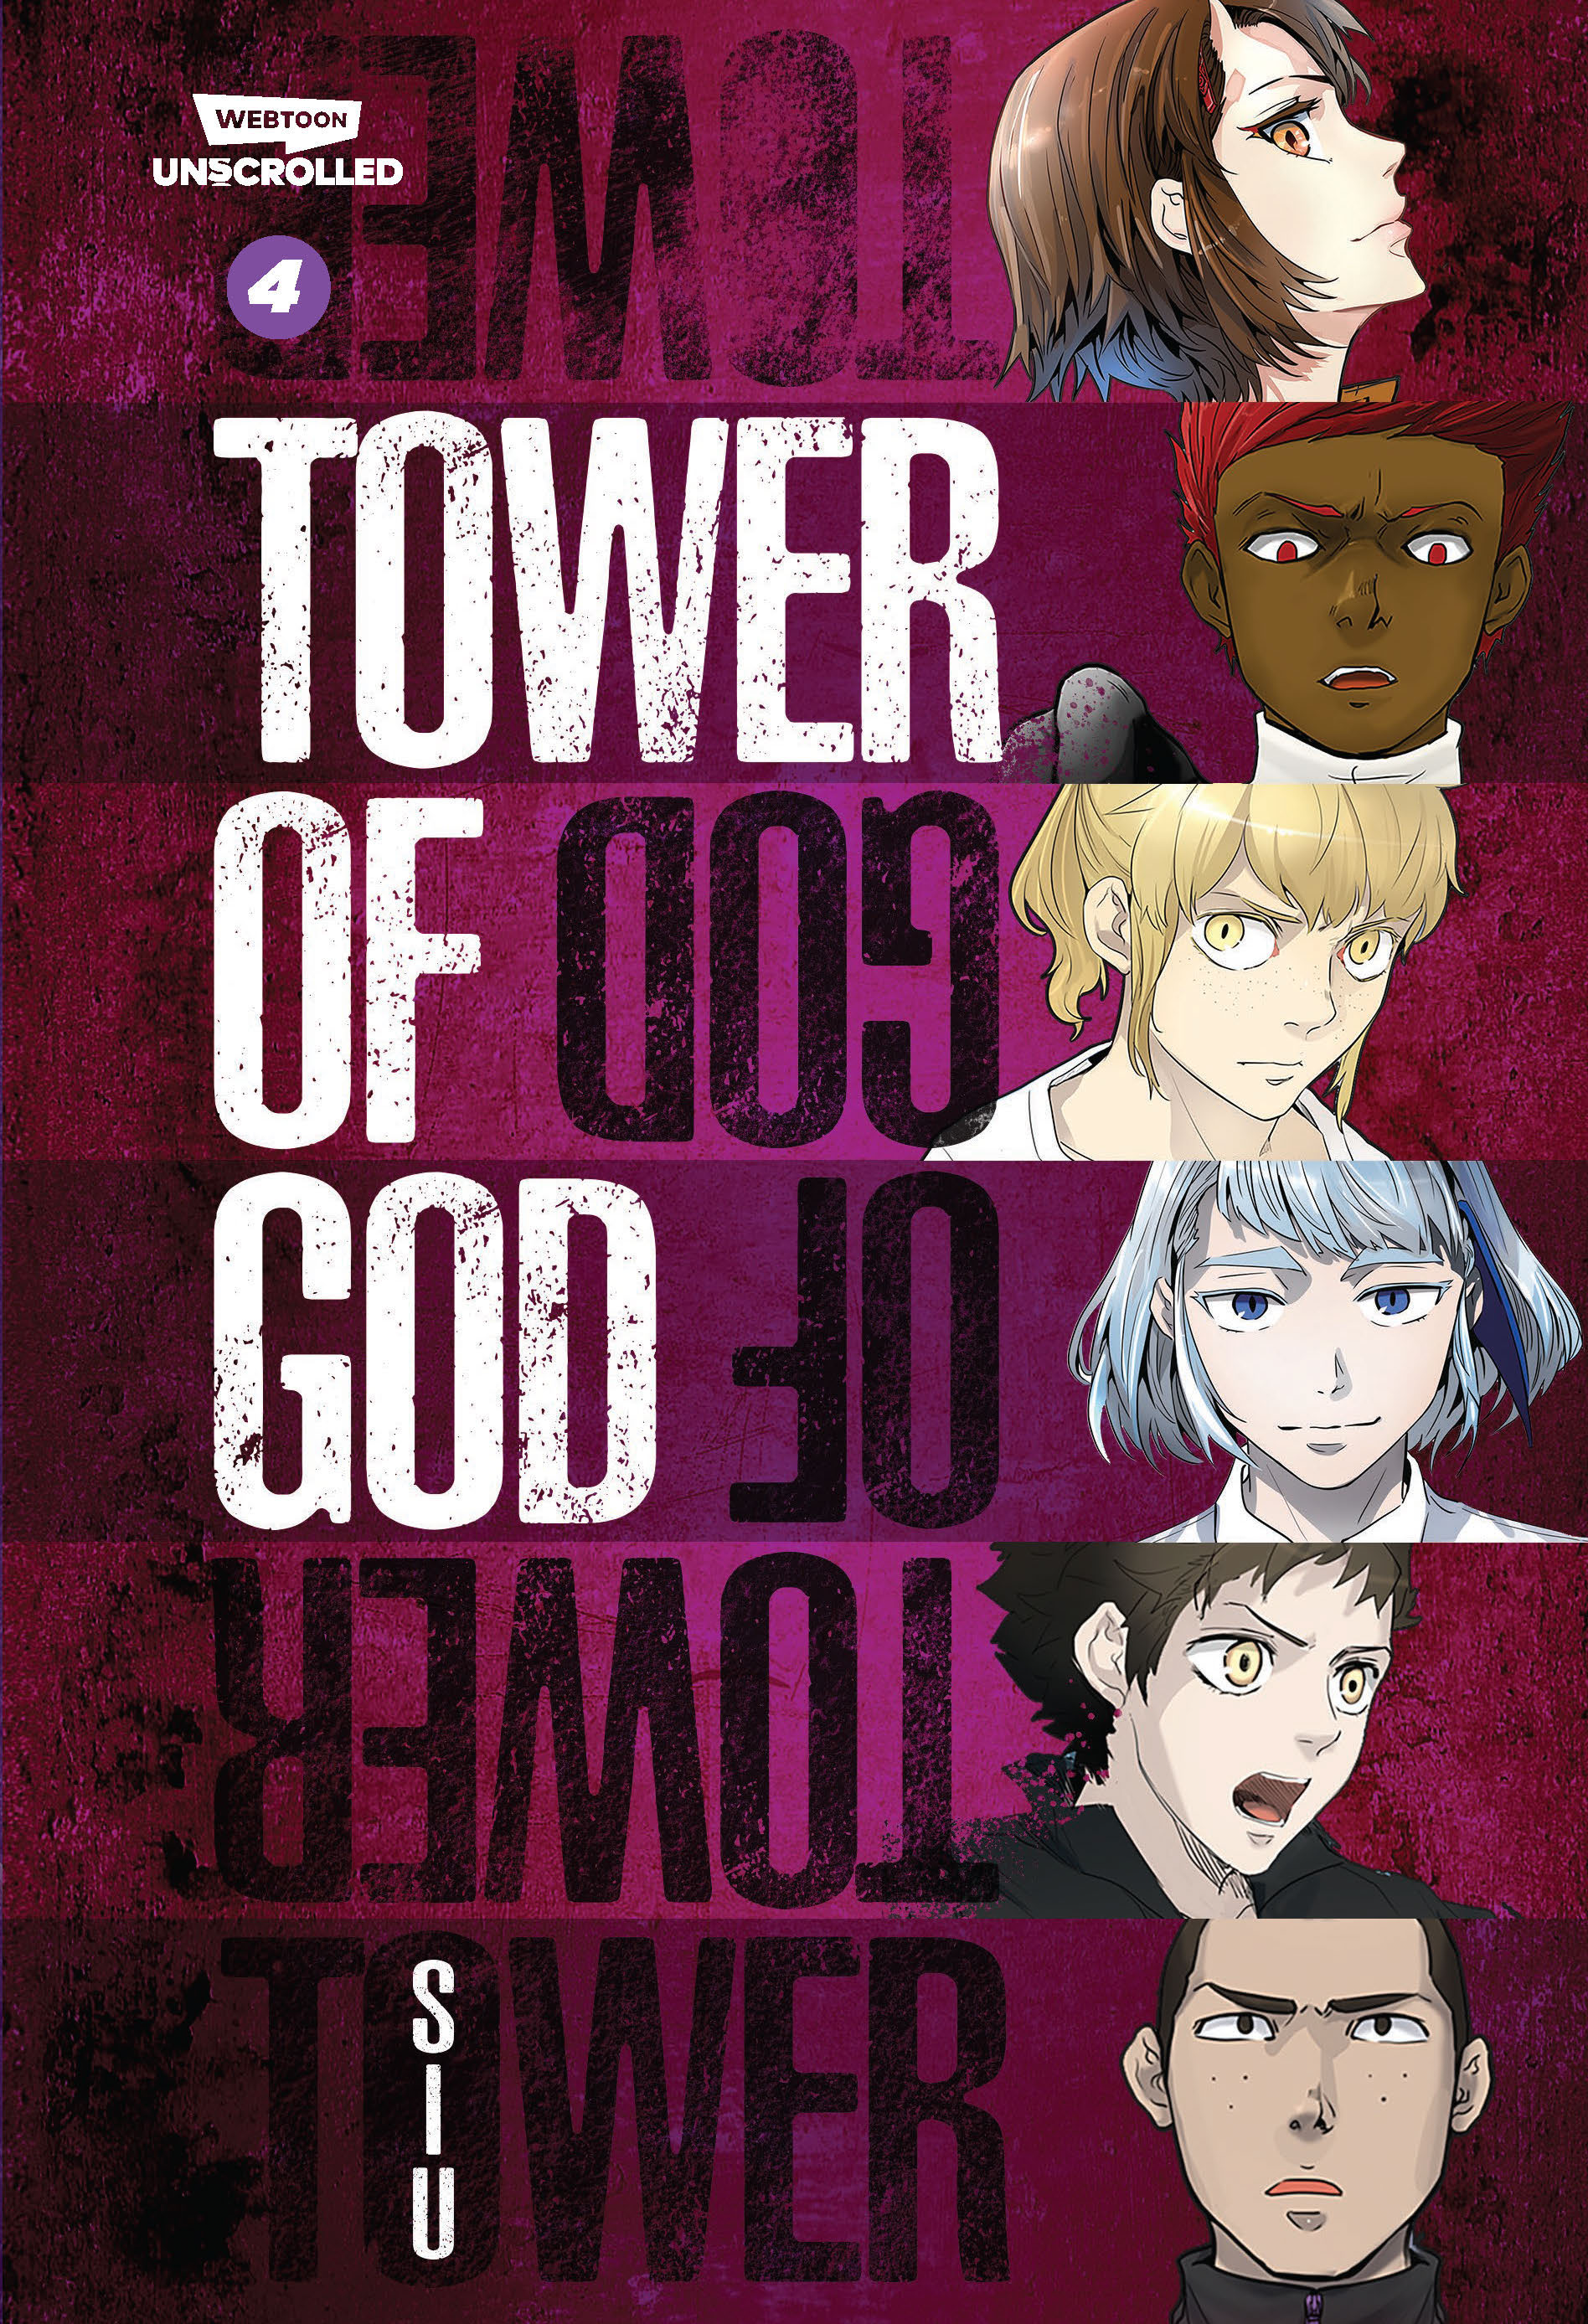 Tower of God Vol. 4 cover.